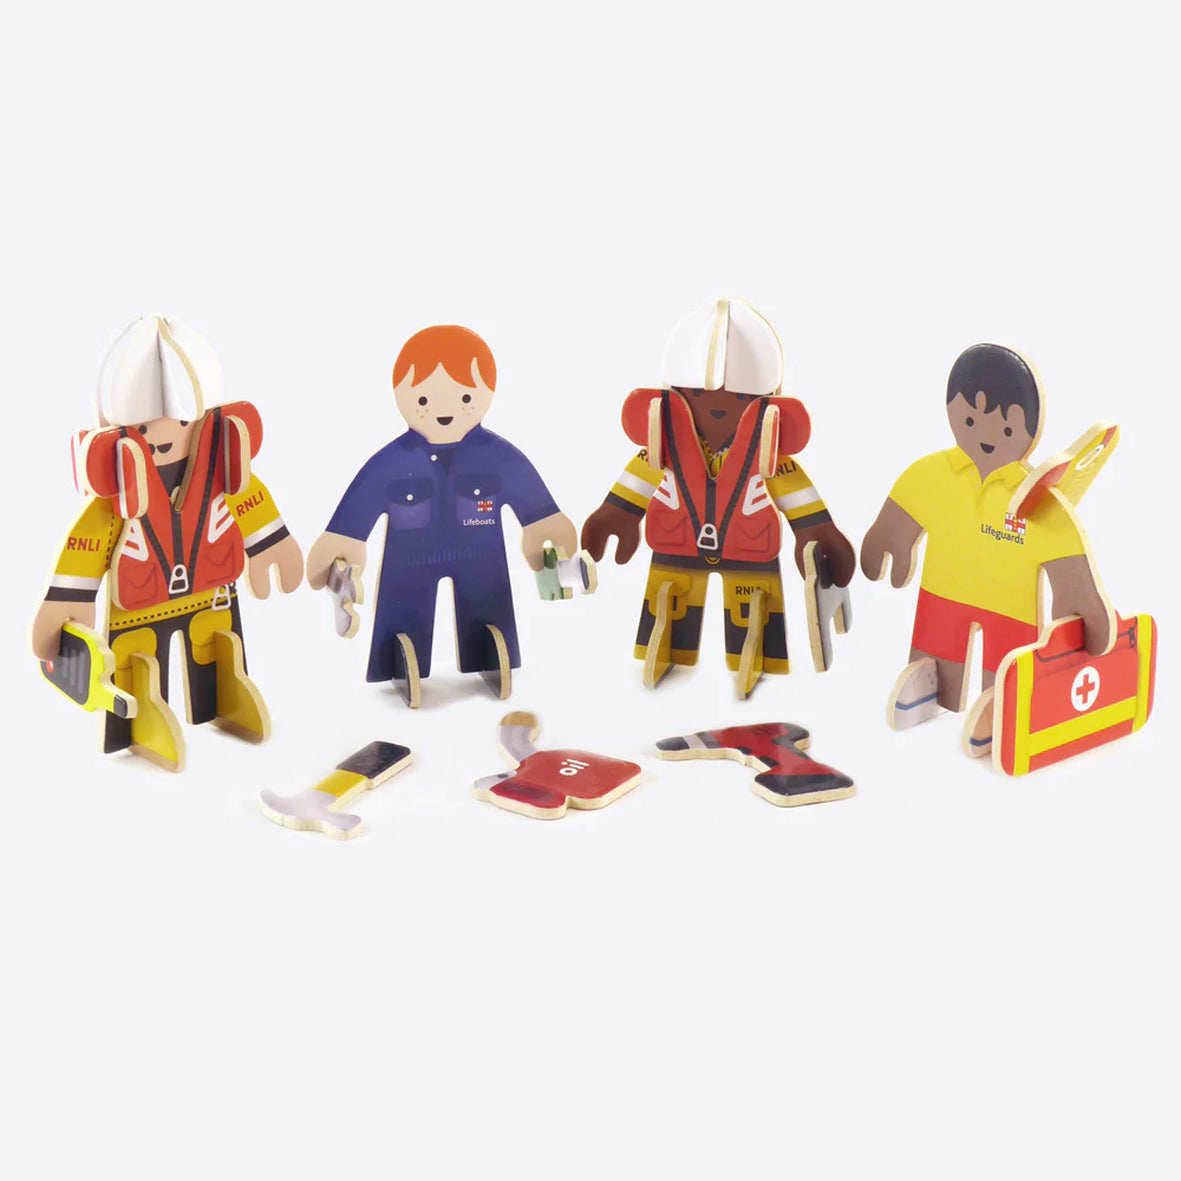 Toy - Playpress Lifeboats RNLI People Set Build and Play